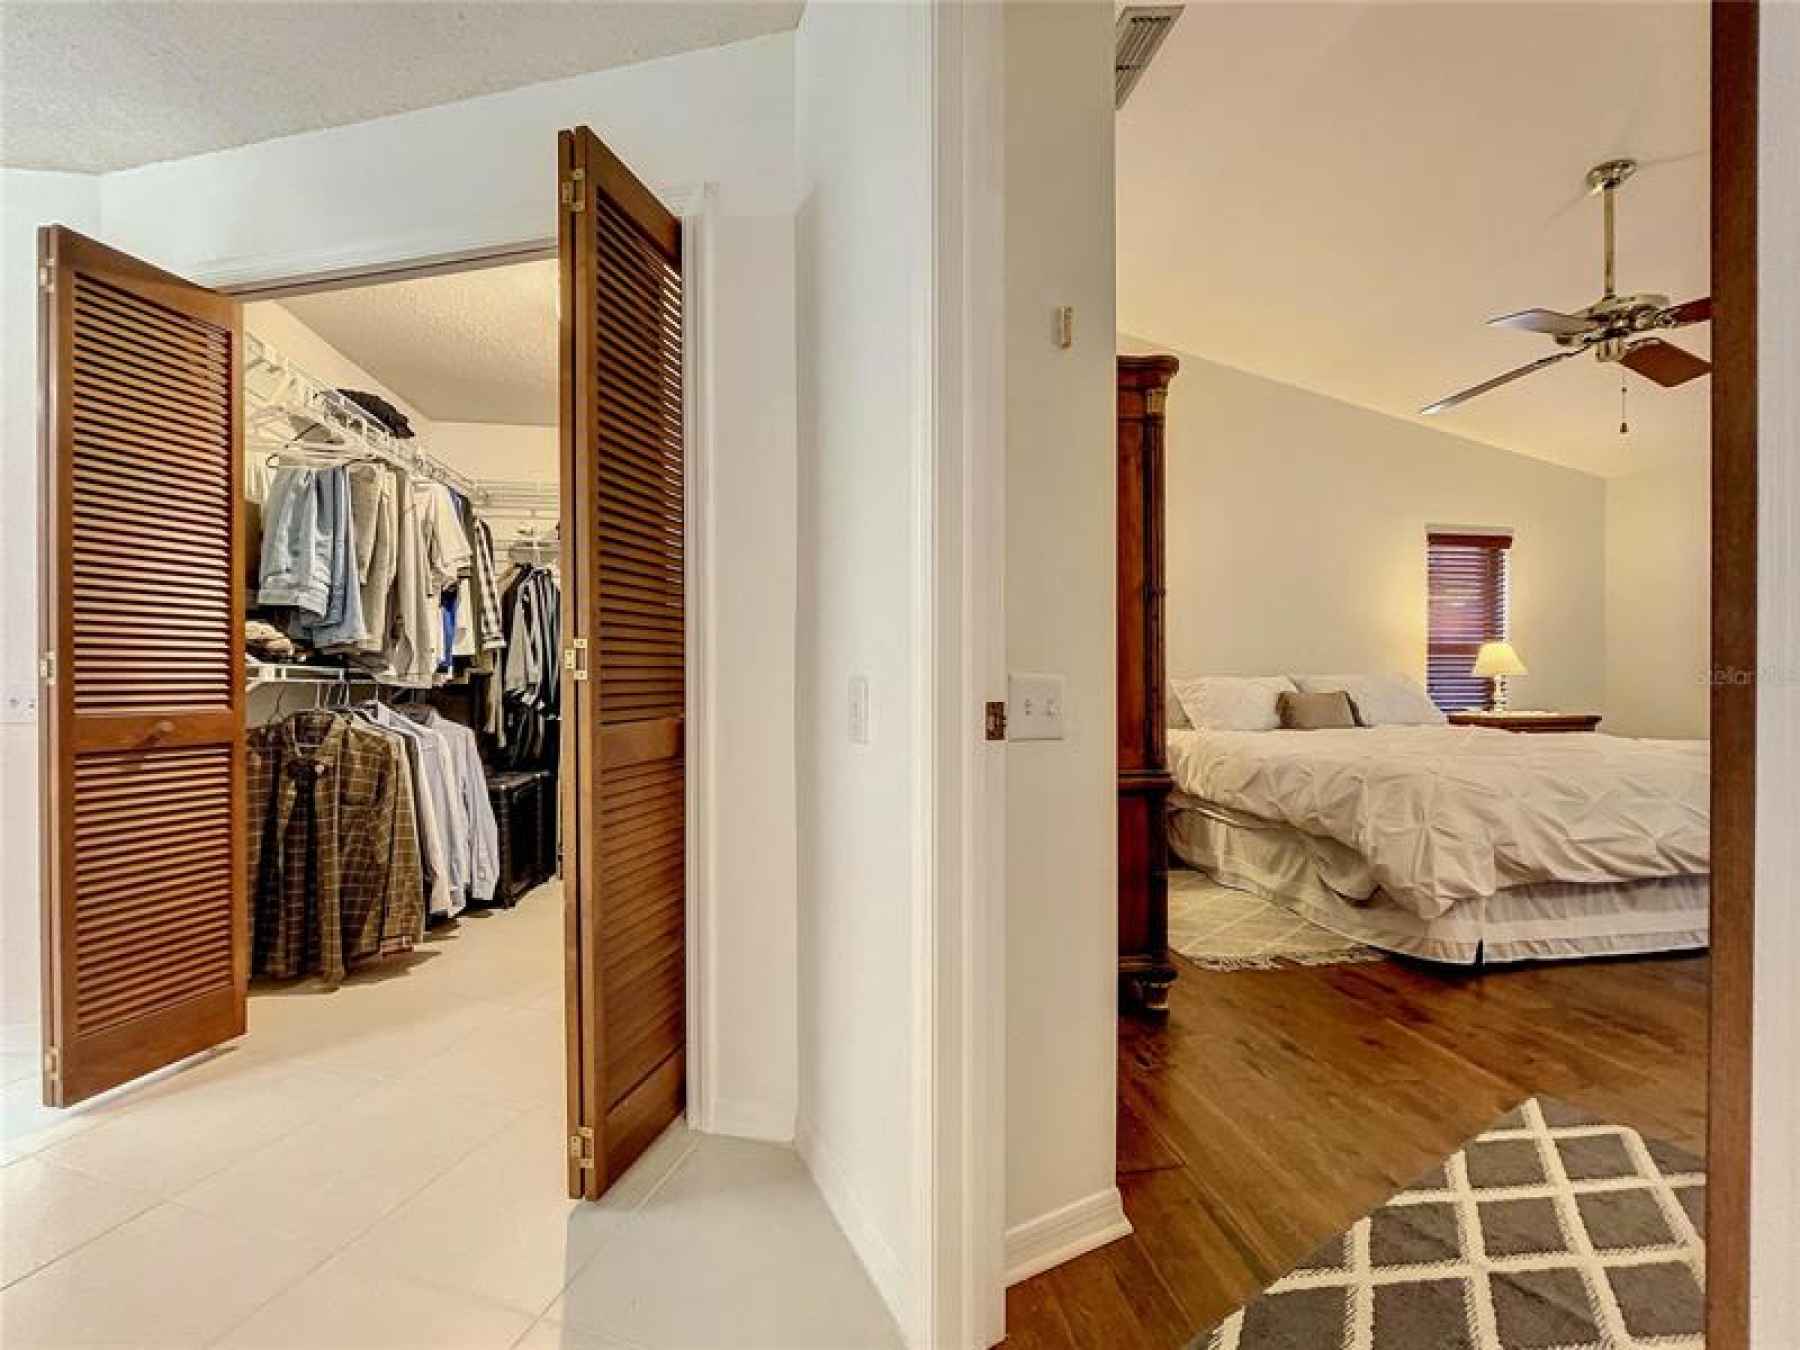 Easy access to walk-in closet